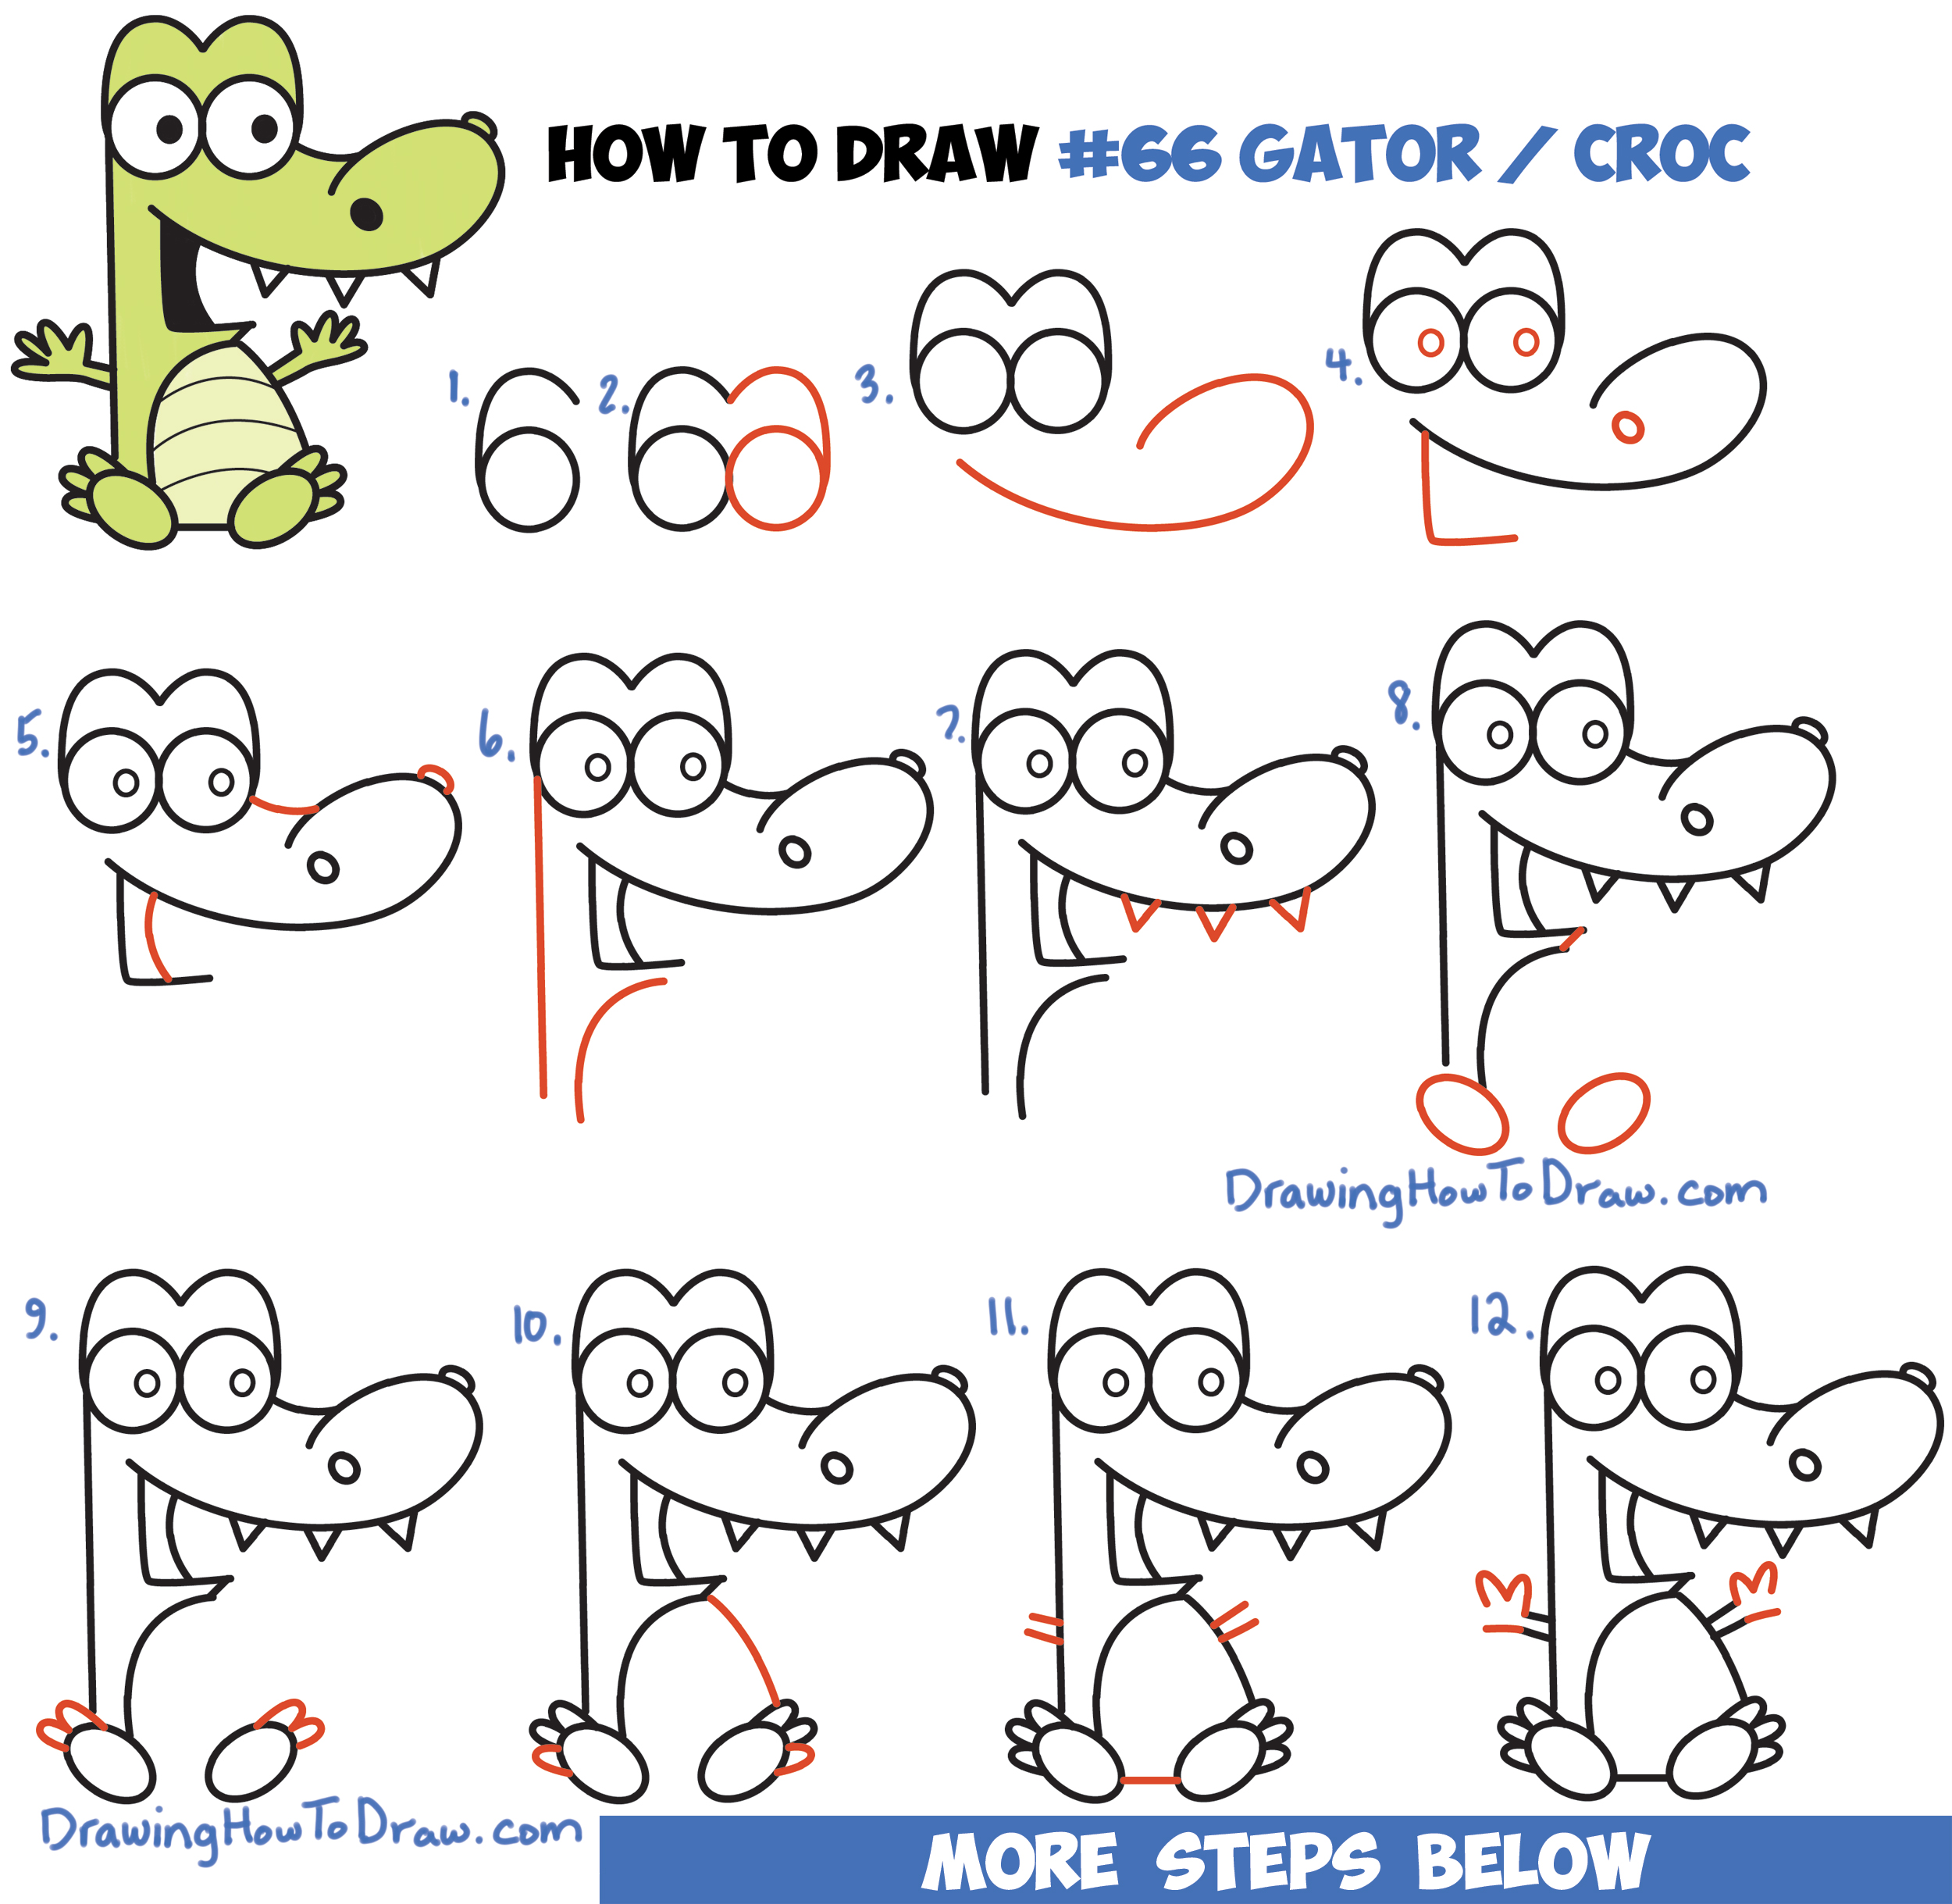 How to Draw Cartoon Crocodile or Alligator from Numbers Easy Step by Step Drawing Tutorial for Kids